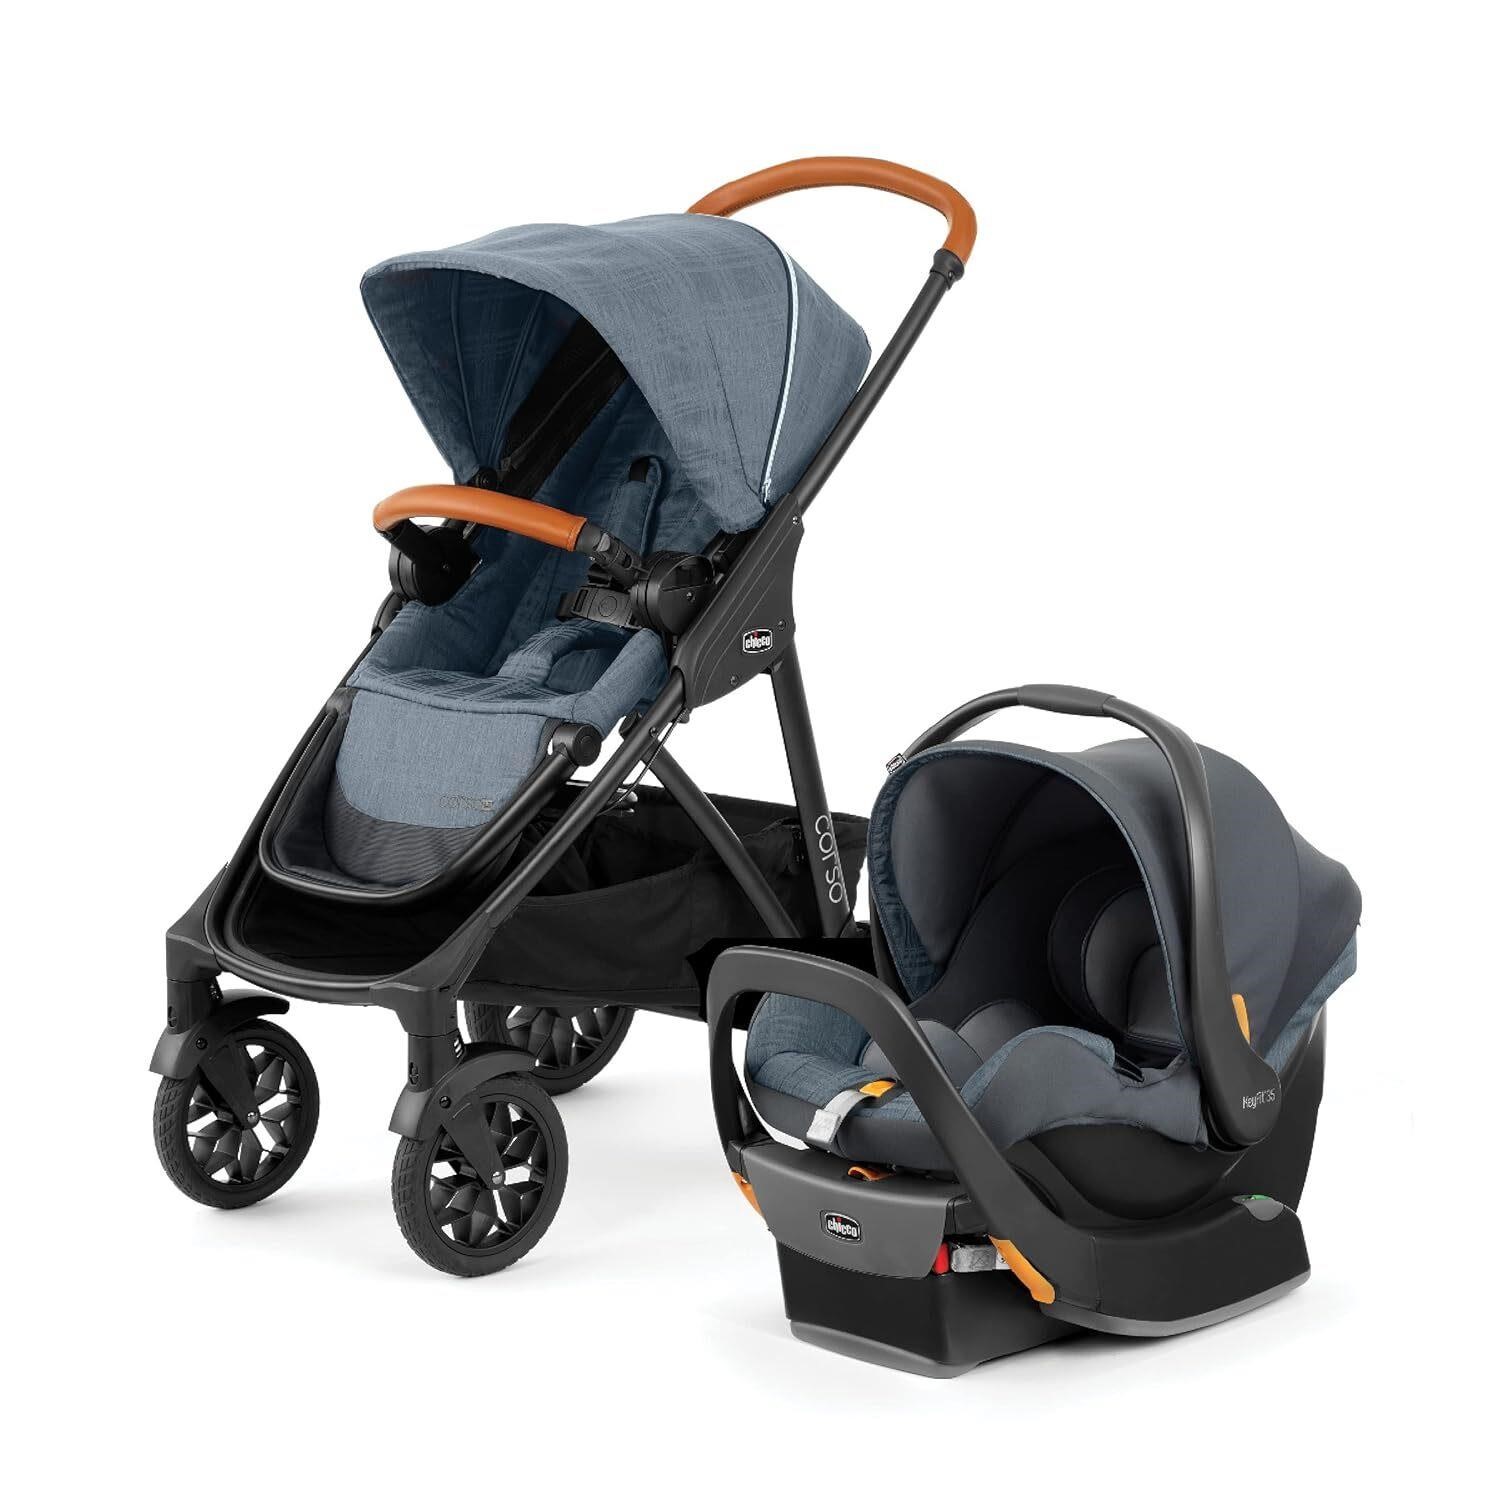 Corso LE Travel System  KeyFit 35 Seat